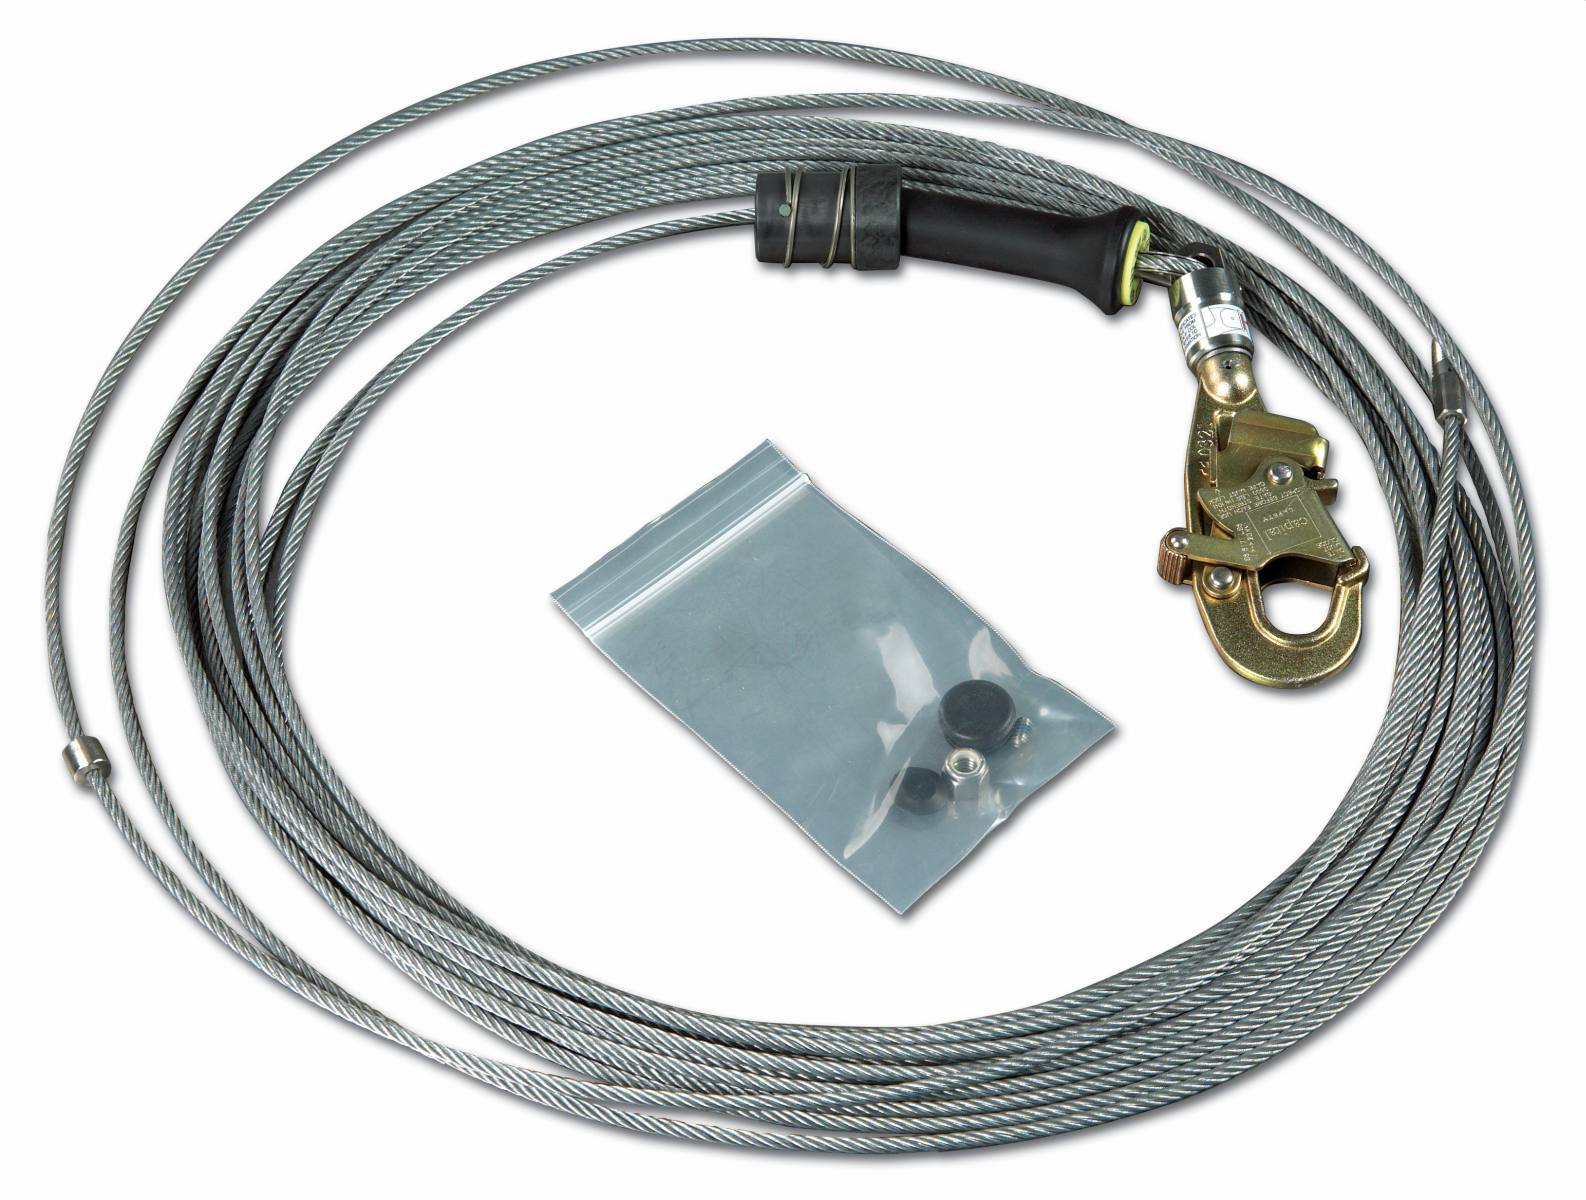 3M DBI-SALA cable replacement assembly for FAST-Line, stainless steel cable with stainless steel carabiner 40 m, 40.0 m